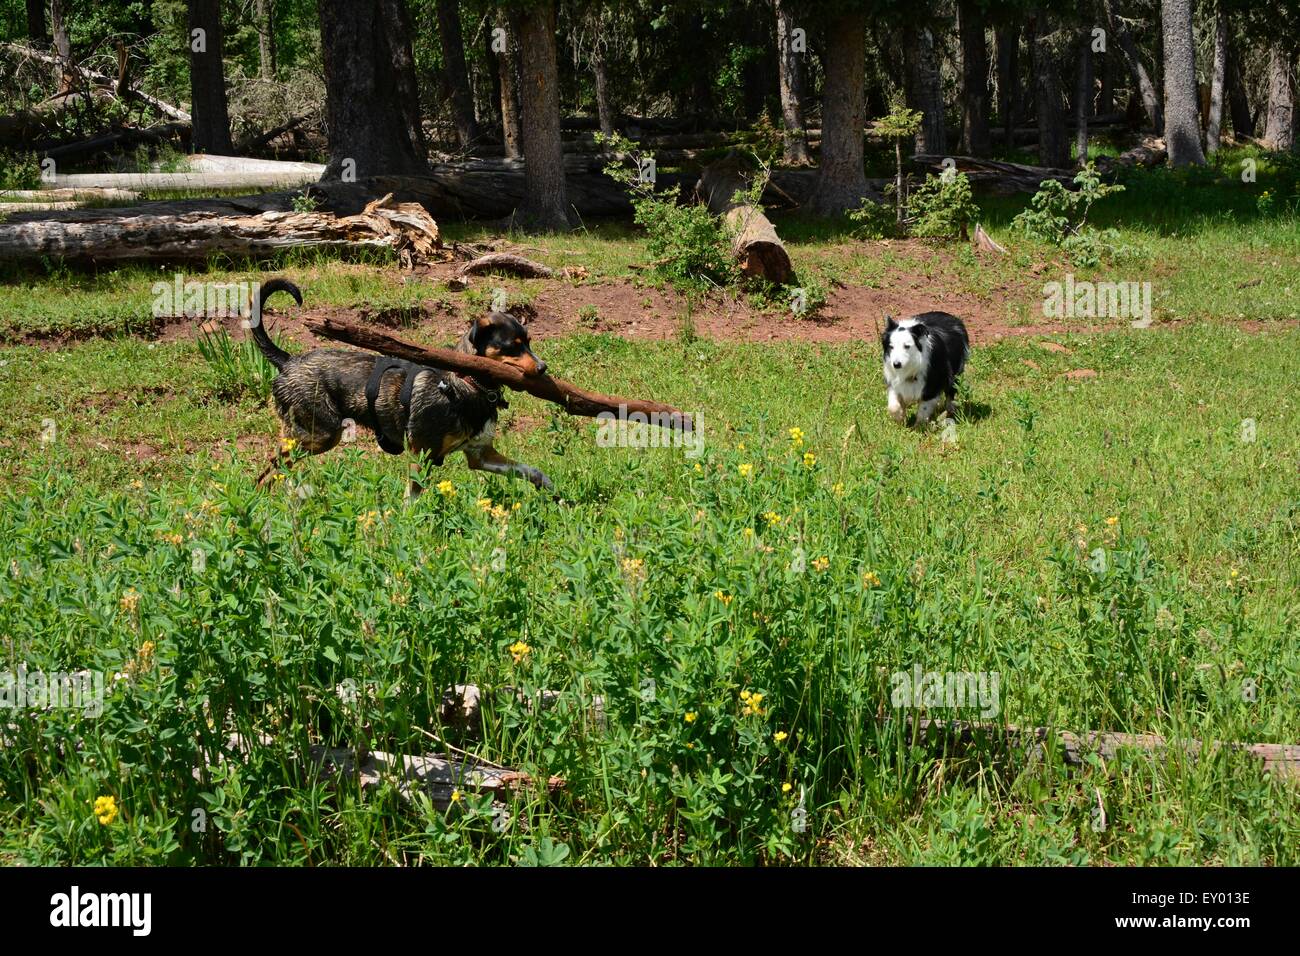 Dog prancing around with huge limb as another dog looks on.  New Mexico - USA Stock Photo